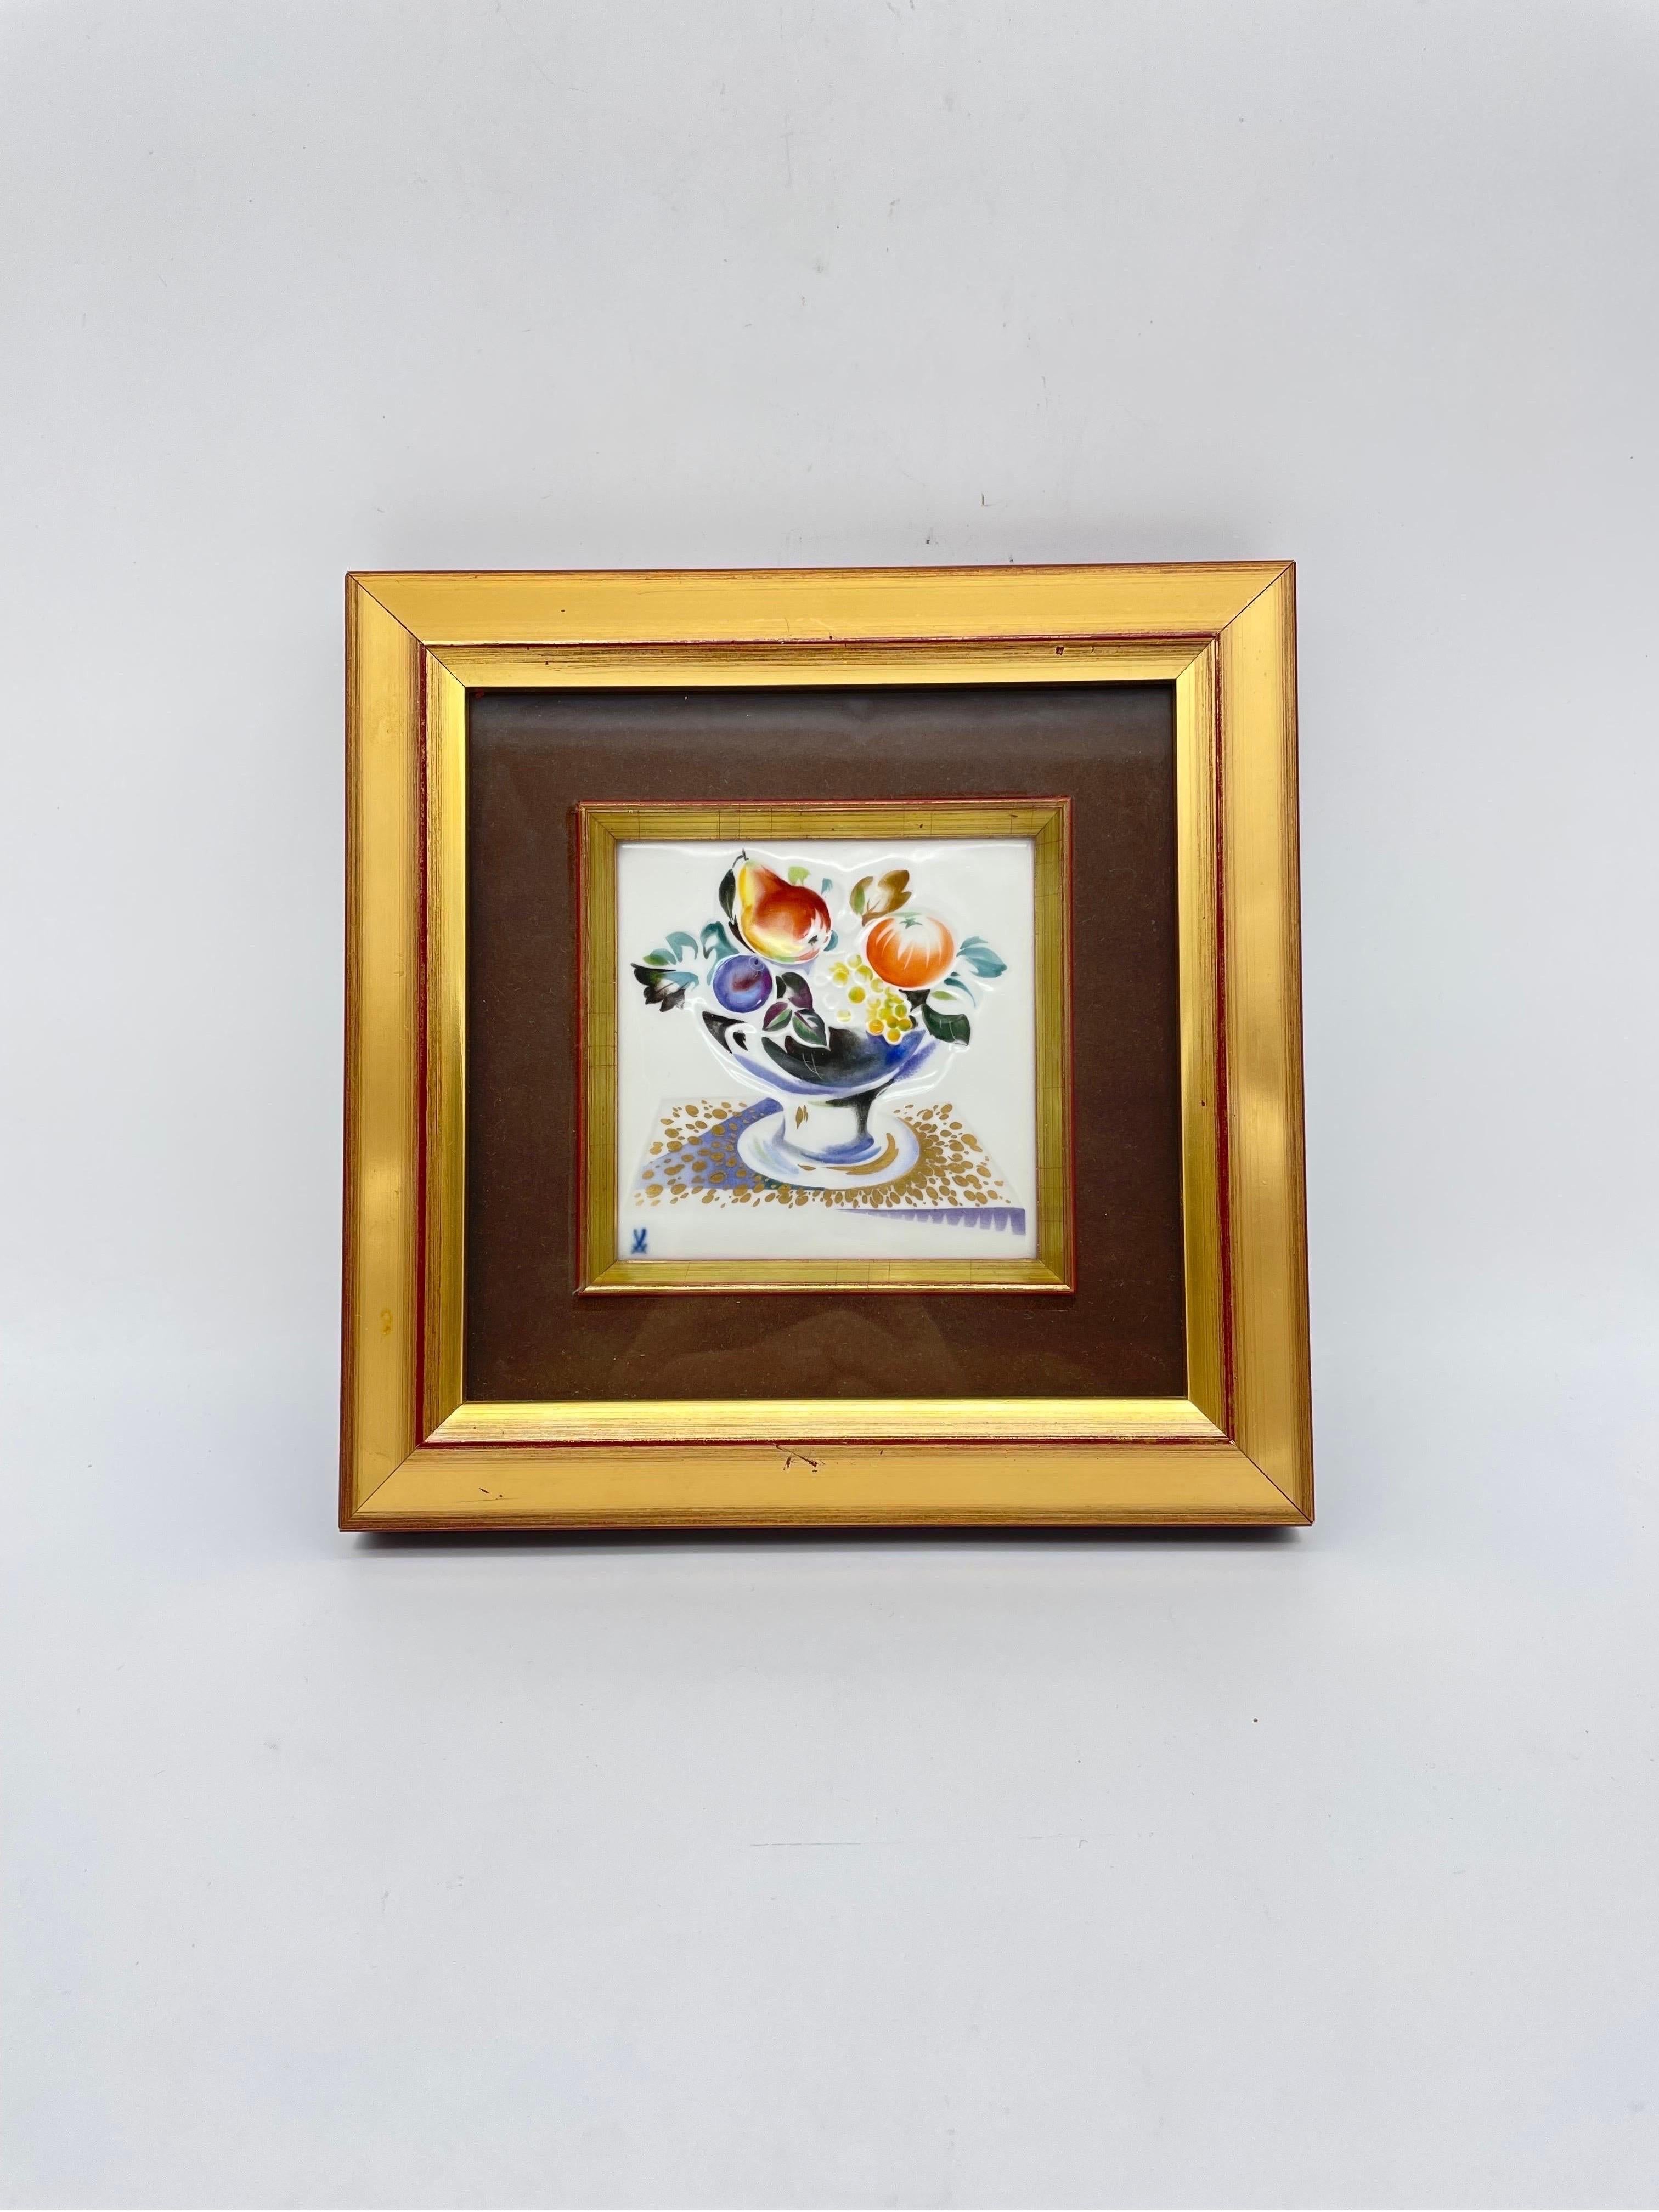 Meissen picture plate/relief plate fruit painting, Professor Heinz Werner

Relief panel, decorated in color on the white background and rich gold painting, image panel set in a high-quality picture frame.

Bottom left, Meissen (sword mark) 1st